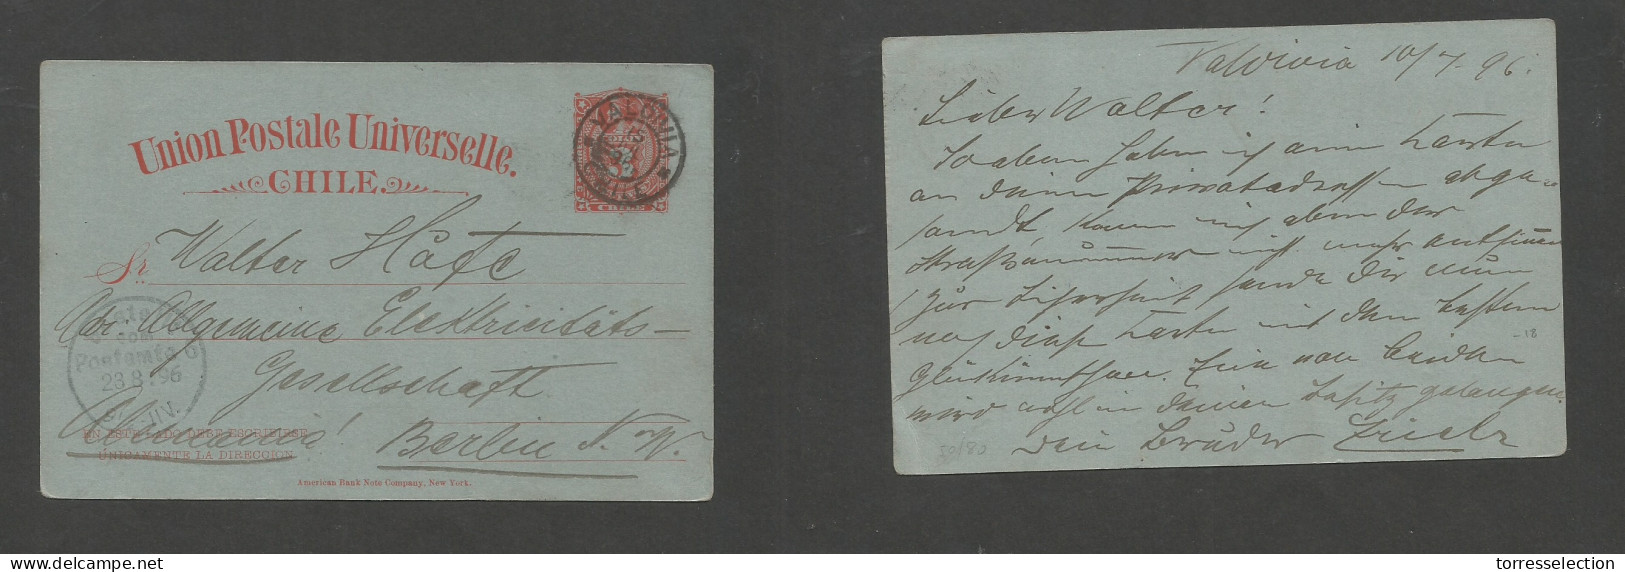 CHILE - Stationery. 1896 (15 July) Valdivia - Germany, Berlin (23 Aug) 3c Red / Greenish Stat Card, Depart Cds. Fine. SA - Chile